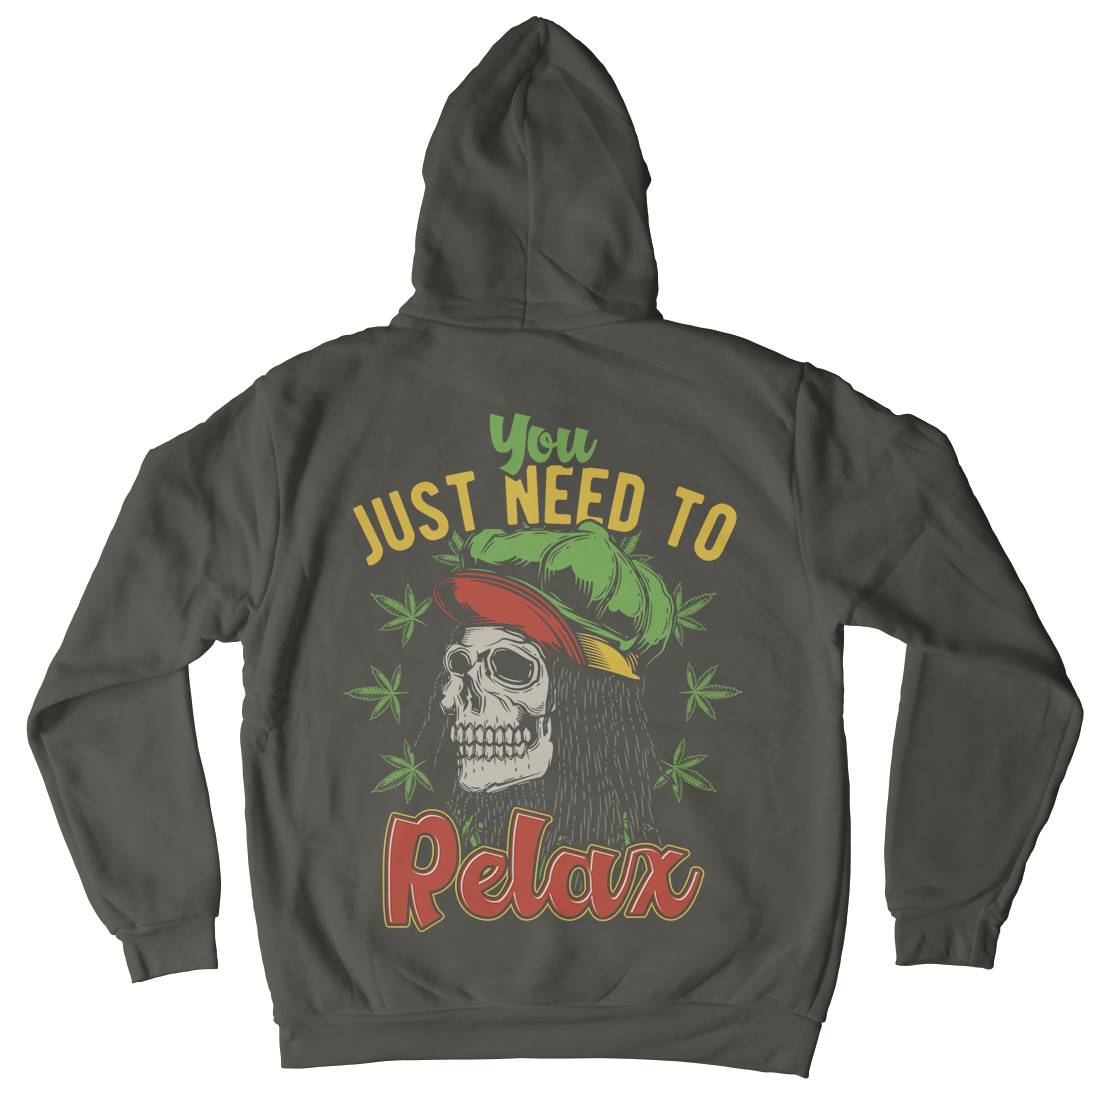 Need To Relax Mens Hoodie With Pocket Drugs B804